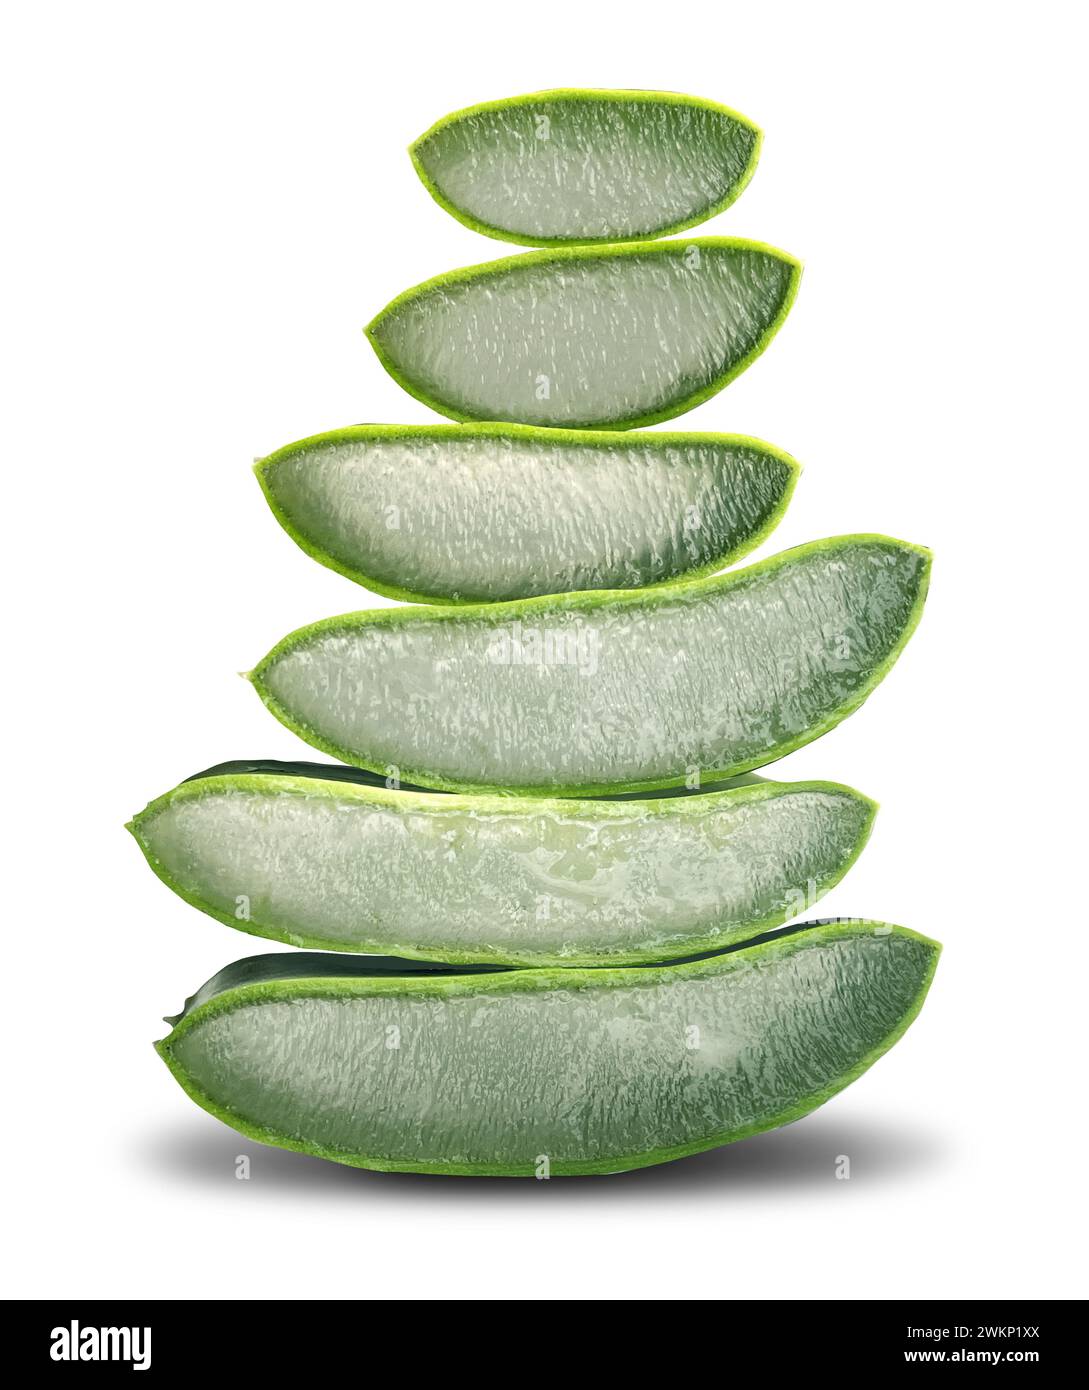 Cut Aloe Vera Gel Stack of leaves as a medicinal Succulent plant with Anti-inflammatory healing properties and as a herbal remedy detoxification also Stock Photo